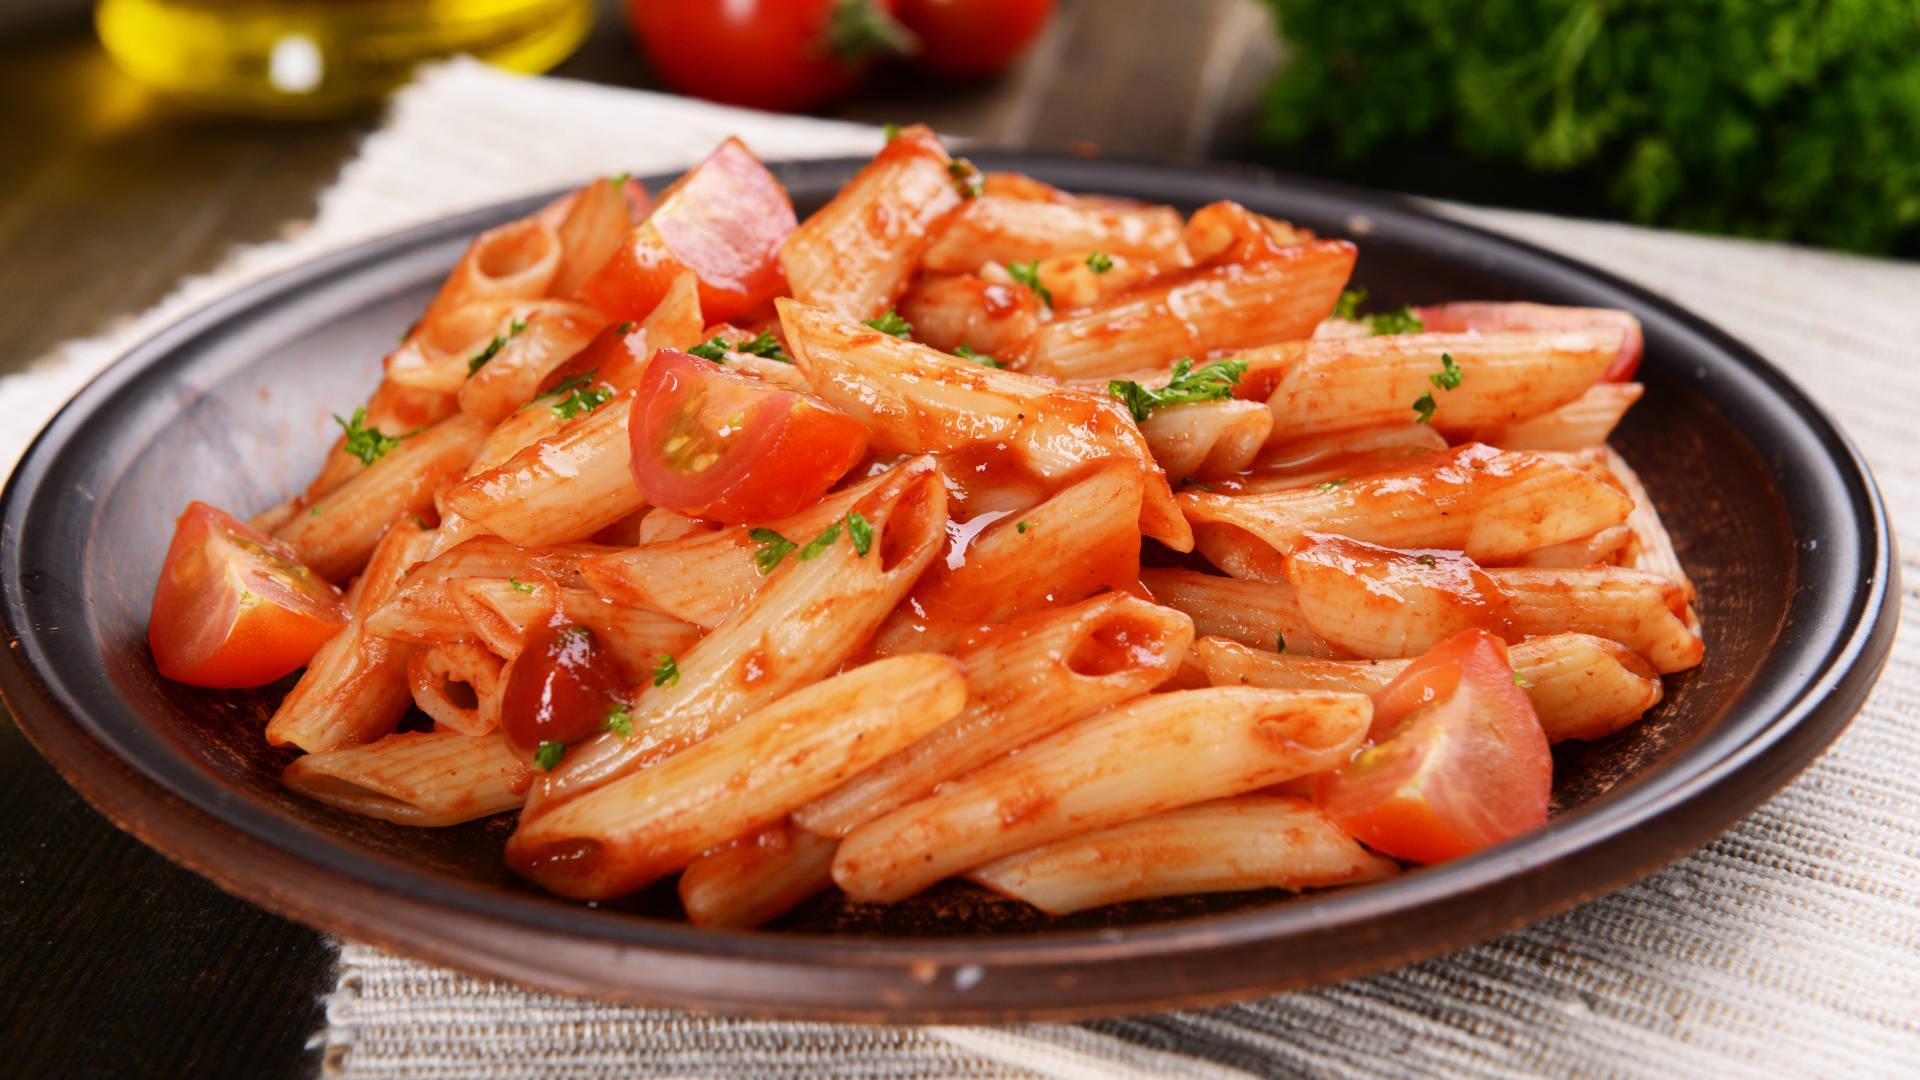 Penne Pasta With Red Sauce Background